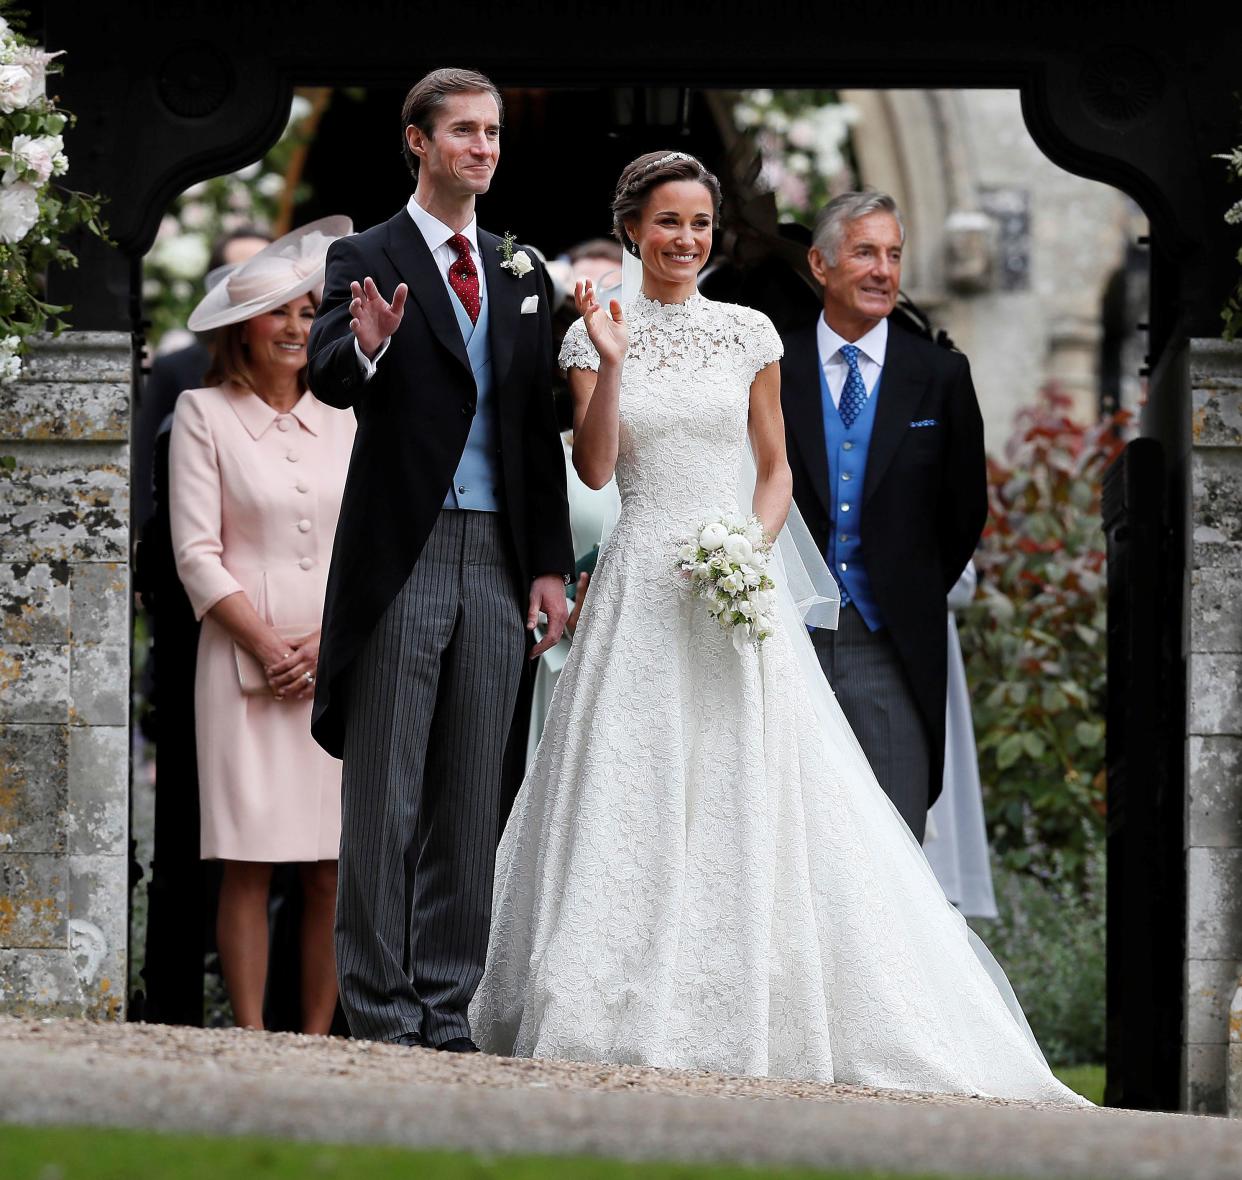 James Matthews poses last spring with his new bride, Pippa Middleton, as James' father, David Matthews (right), looks on. (Photo: Reuters/pool)